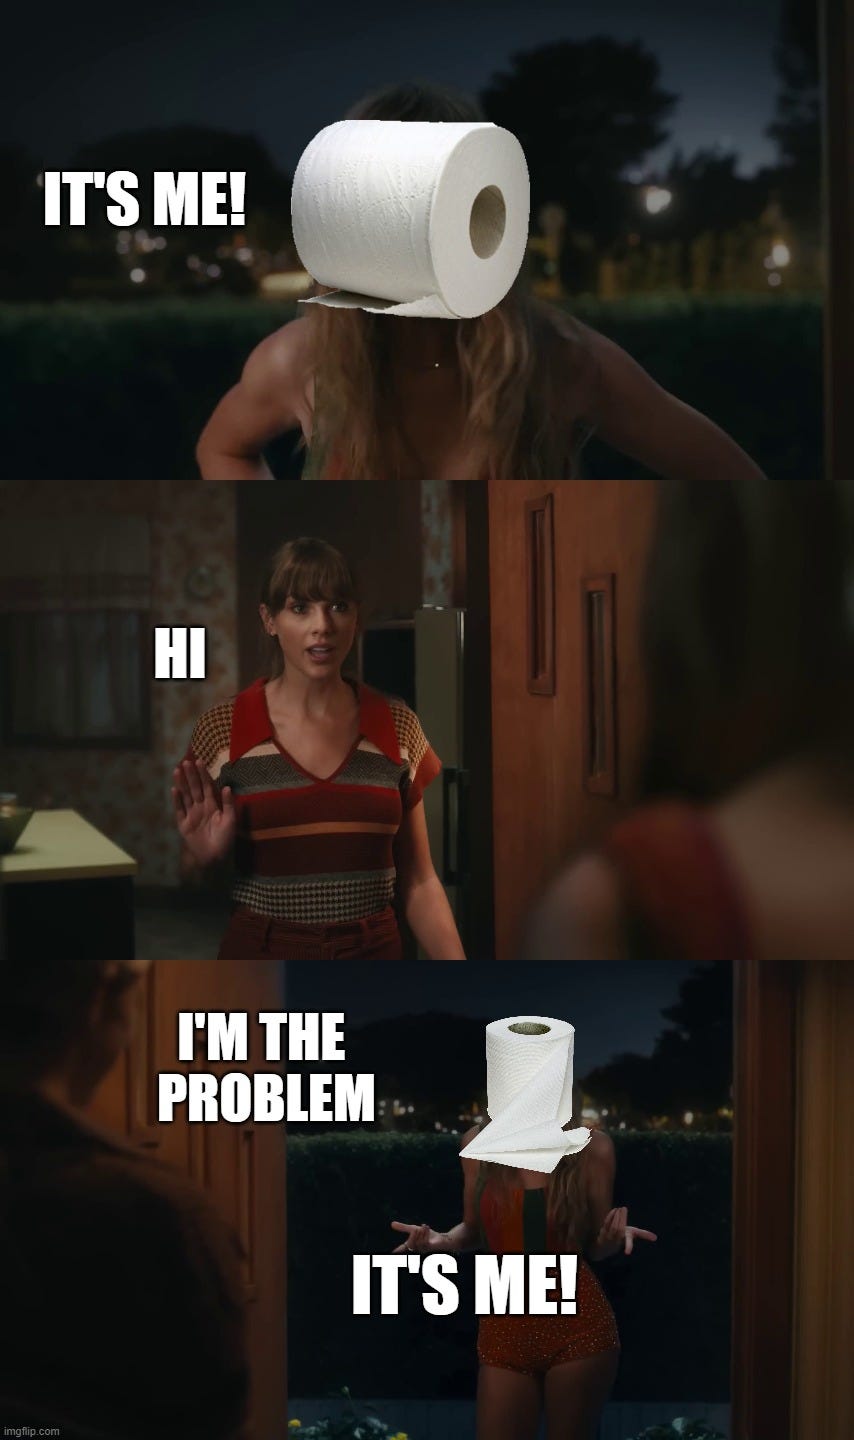 3-part meme of Taylor Swift as toilet paper saying "hi, it's me" to herself, then "I'm the problem, it's me!"